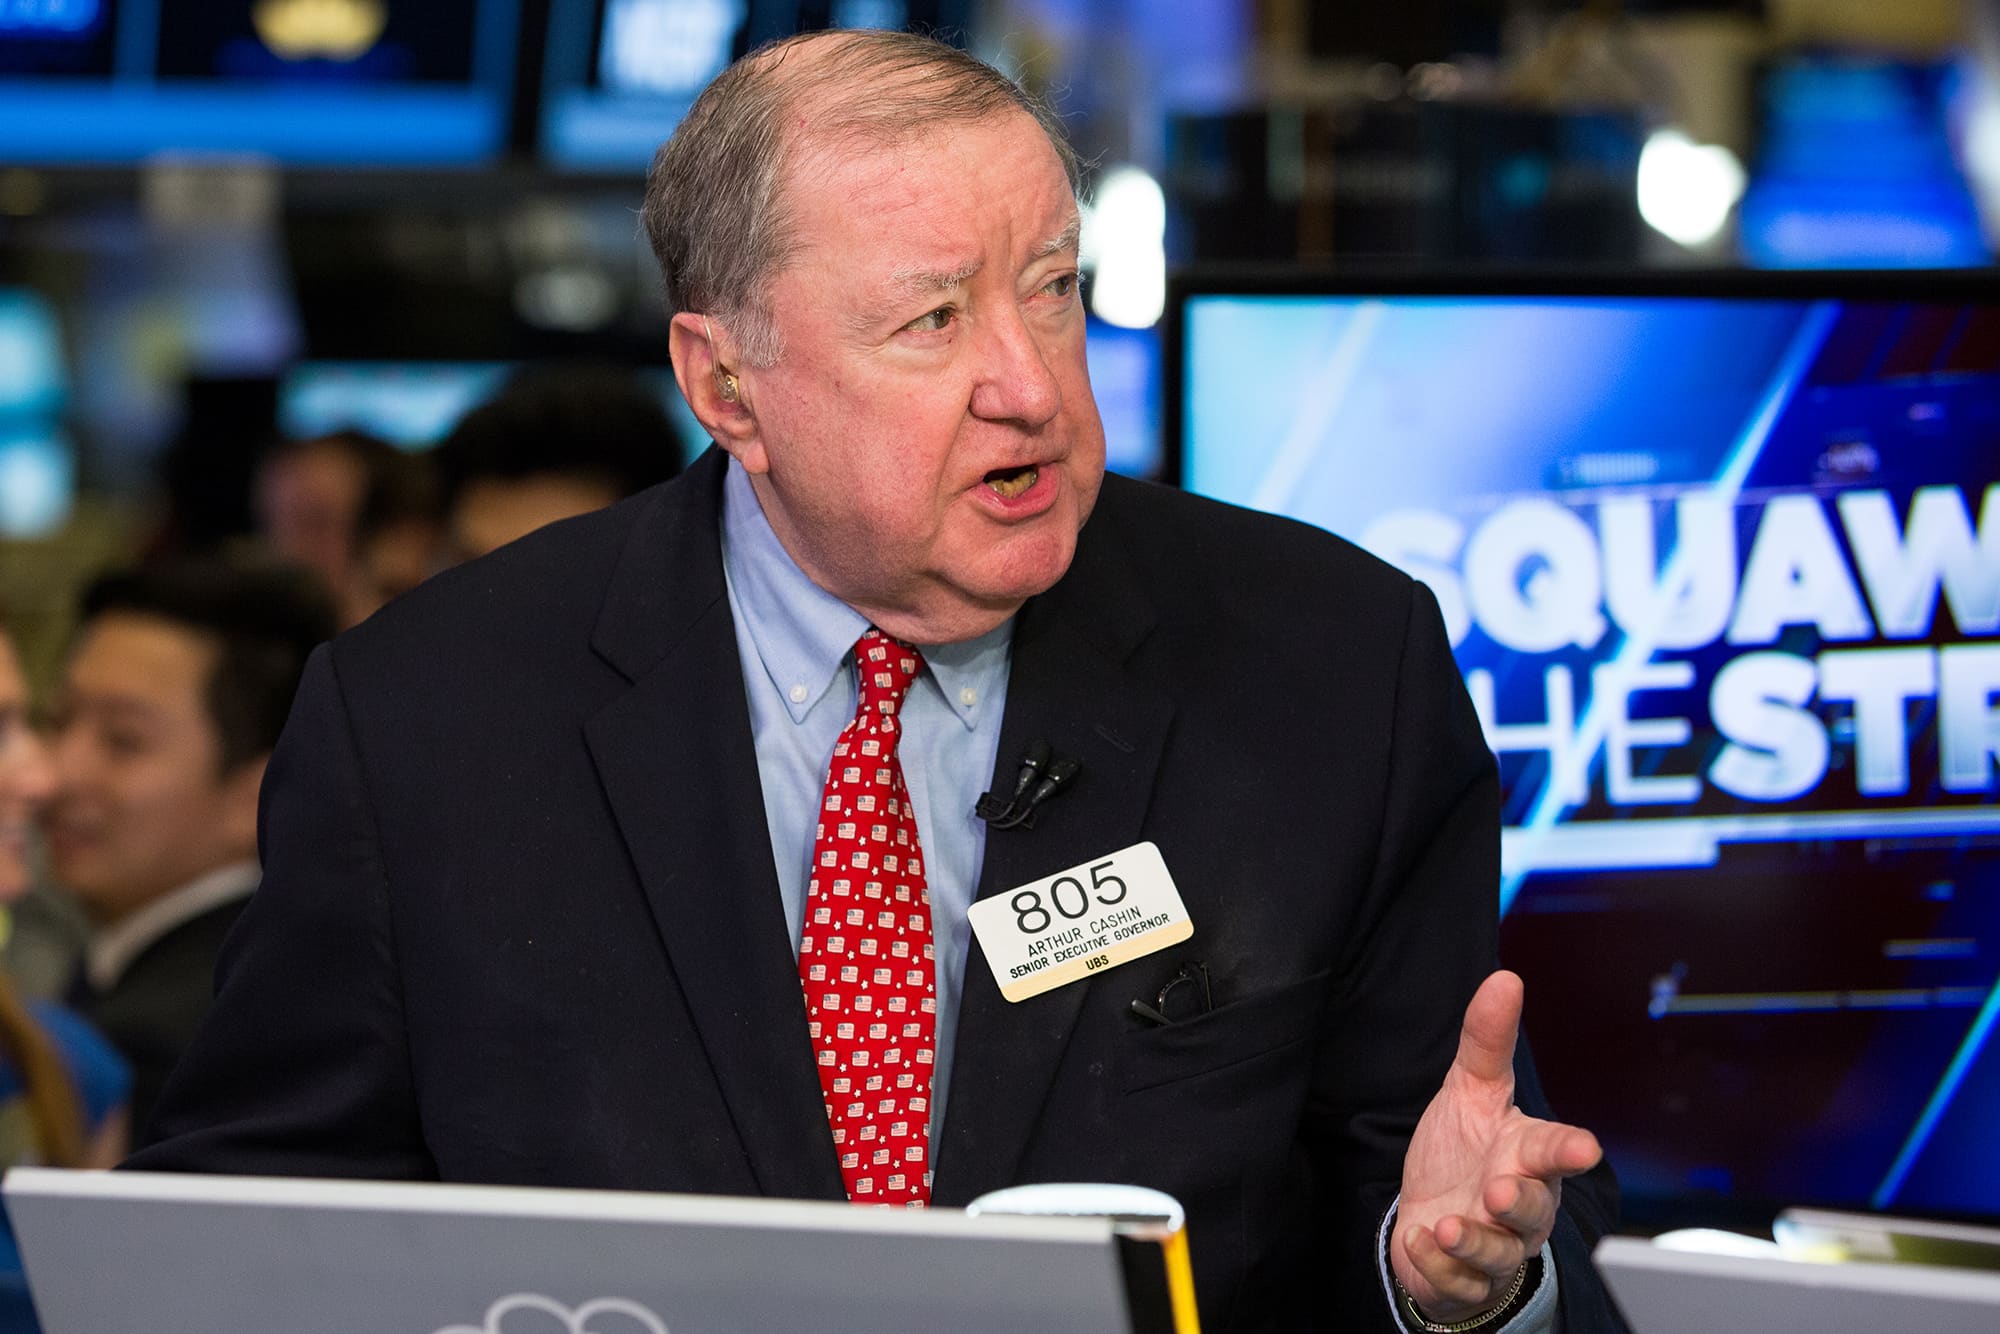 These are the key levels UBS's Art Cashin will be eyeing for the January rally